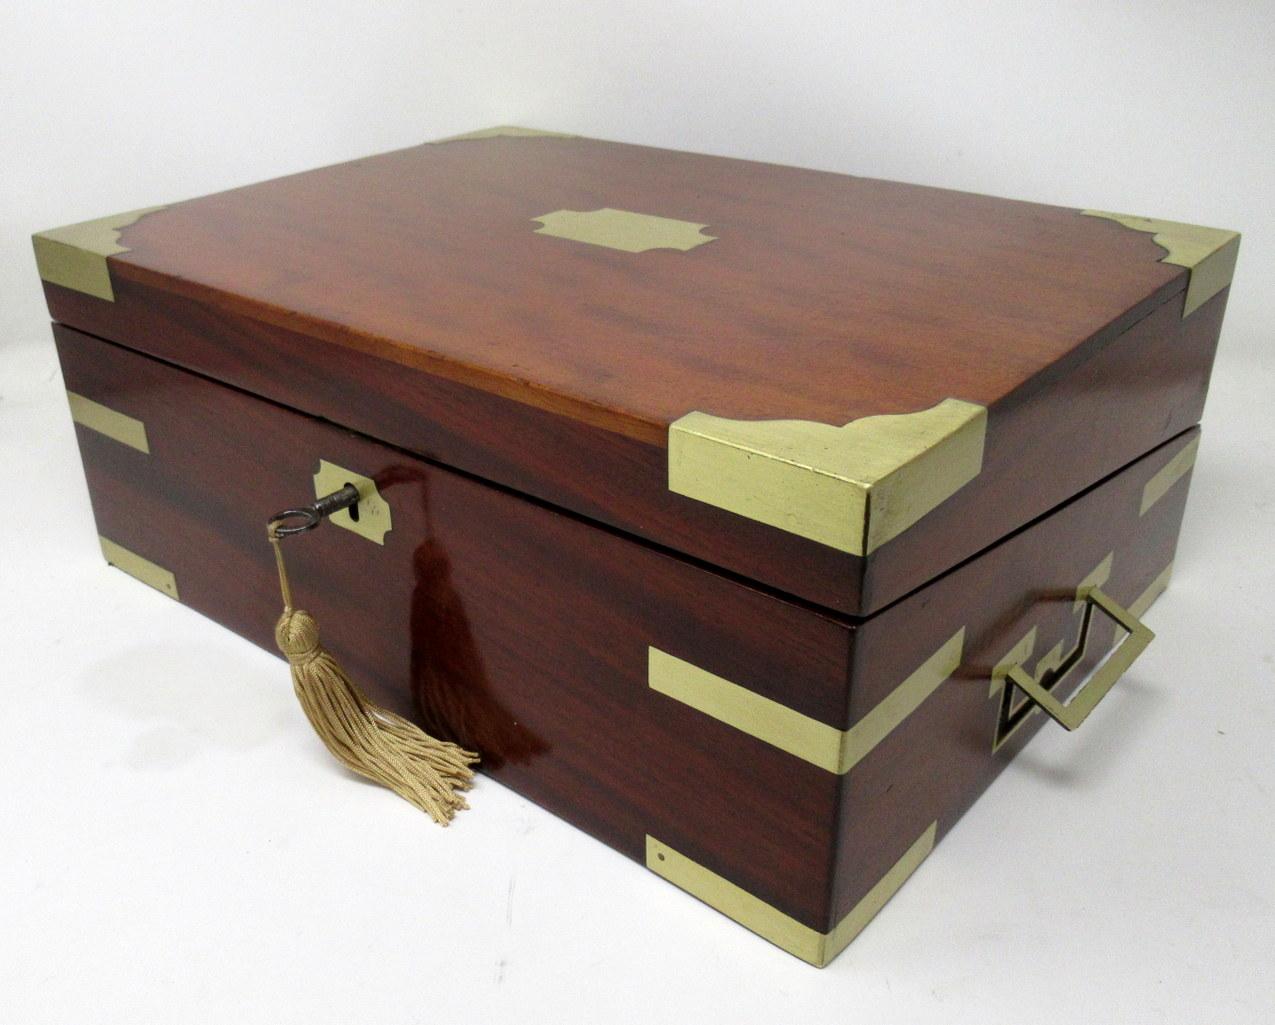 An exceptionally fine quality English well figured solid mahogany ladies or gents travelling writing slope of outstanding quality and medium proportions, with unusual moulded brass inlay decoration, flush side carrying handles and central canted